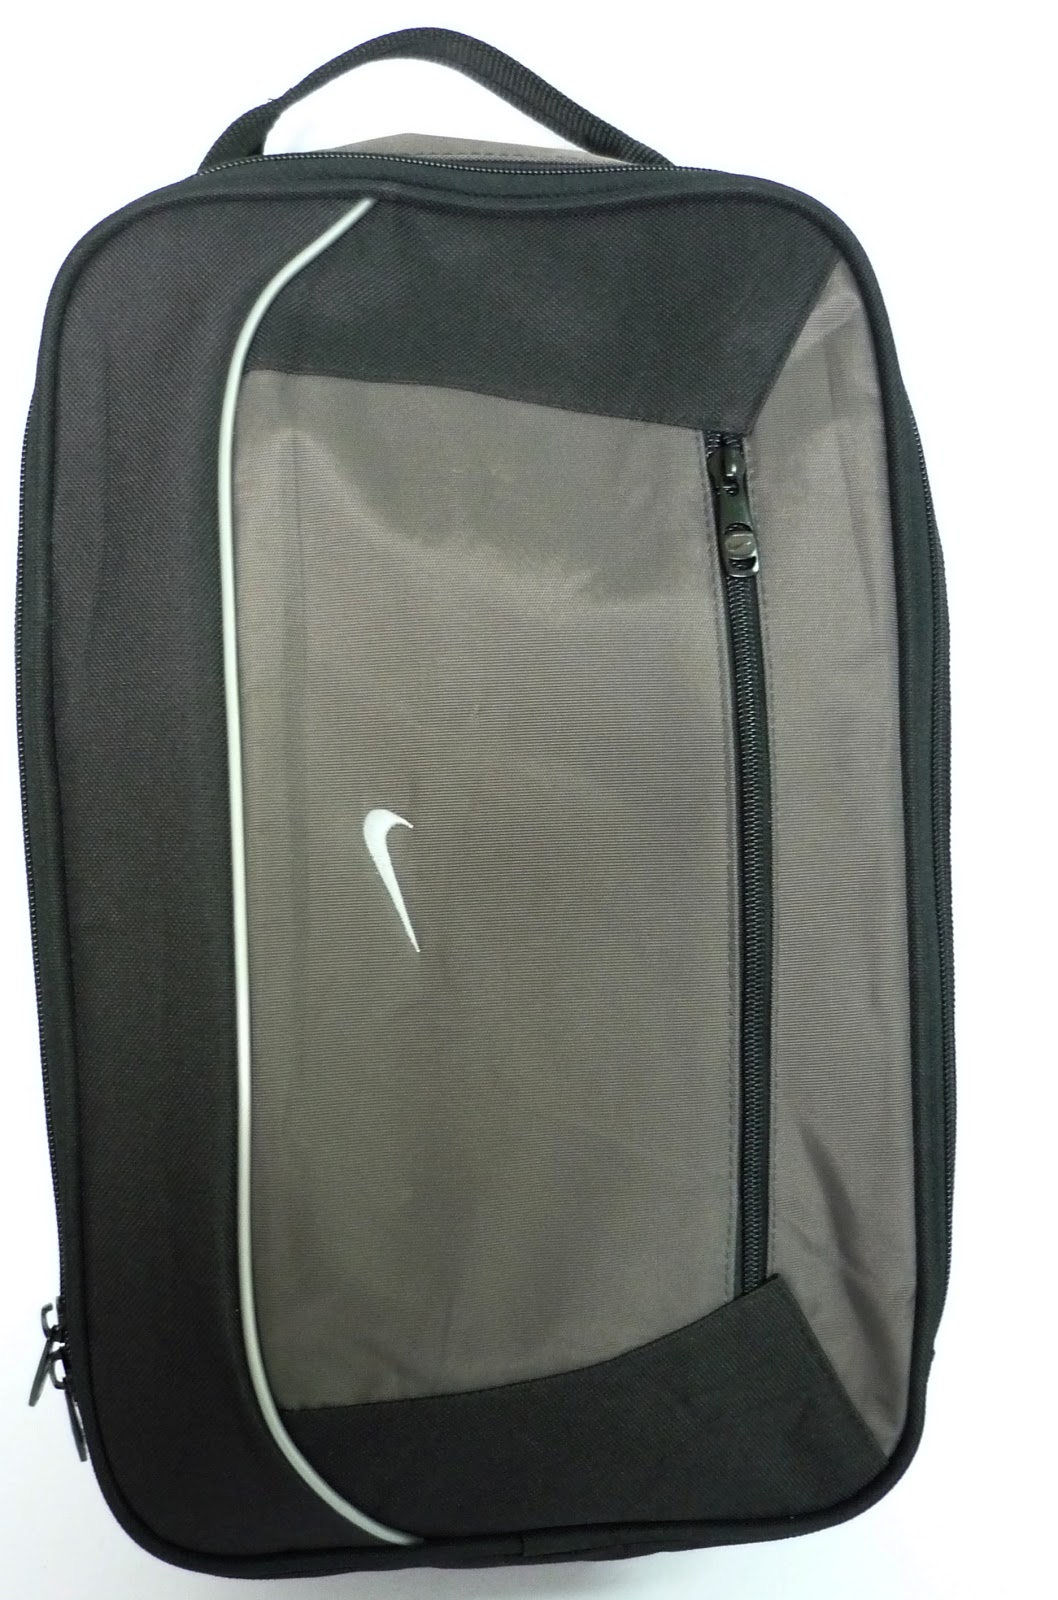 @RCHYbundle: NIKE sling single cross body bags and shoes large bags